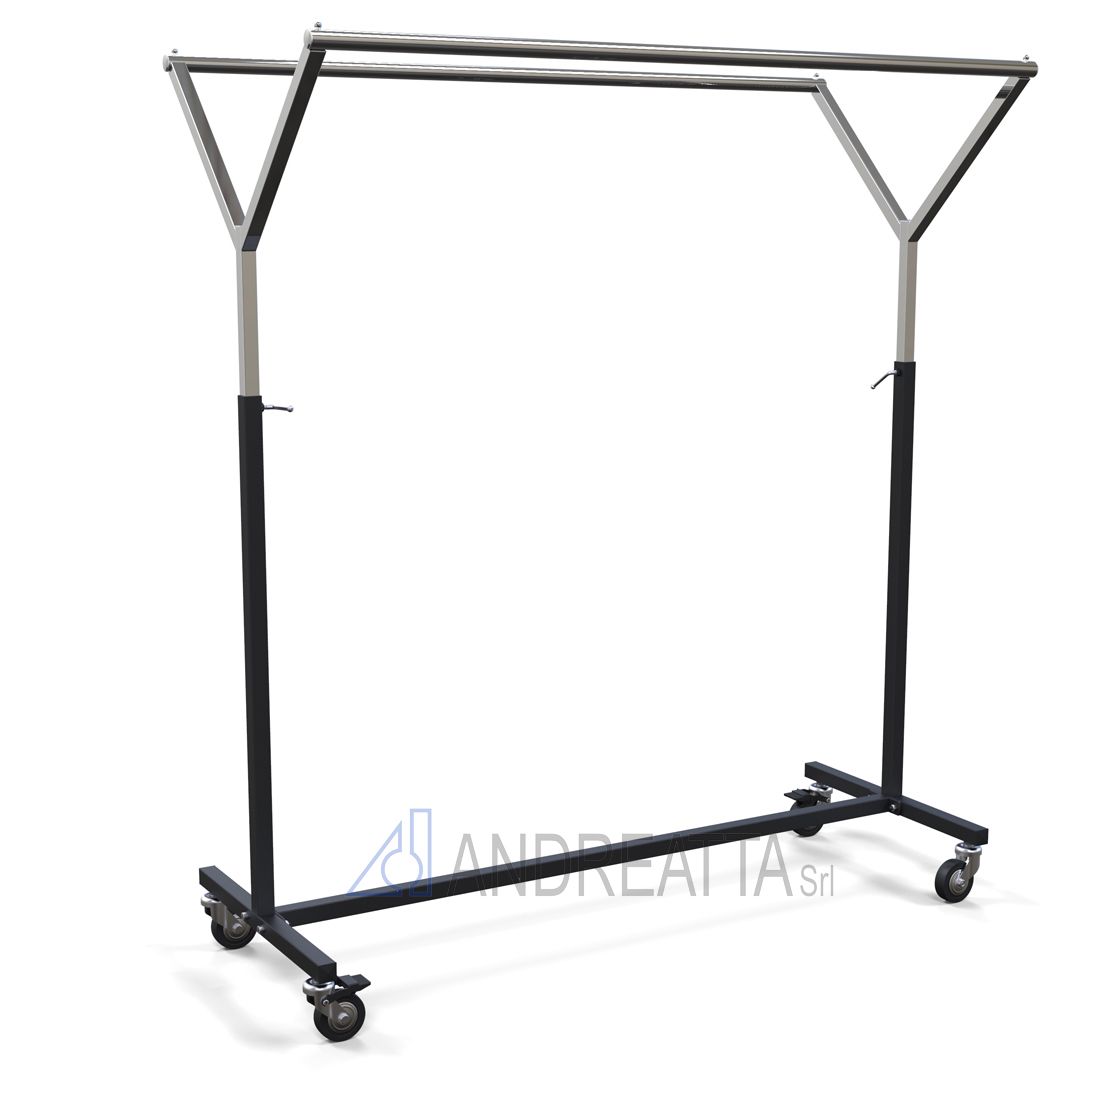 Double Garment rail Adjustable in height